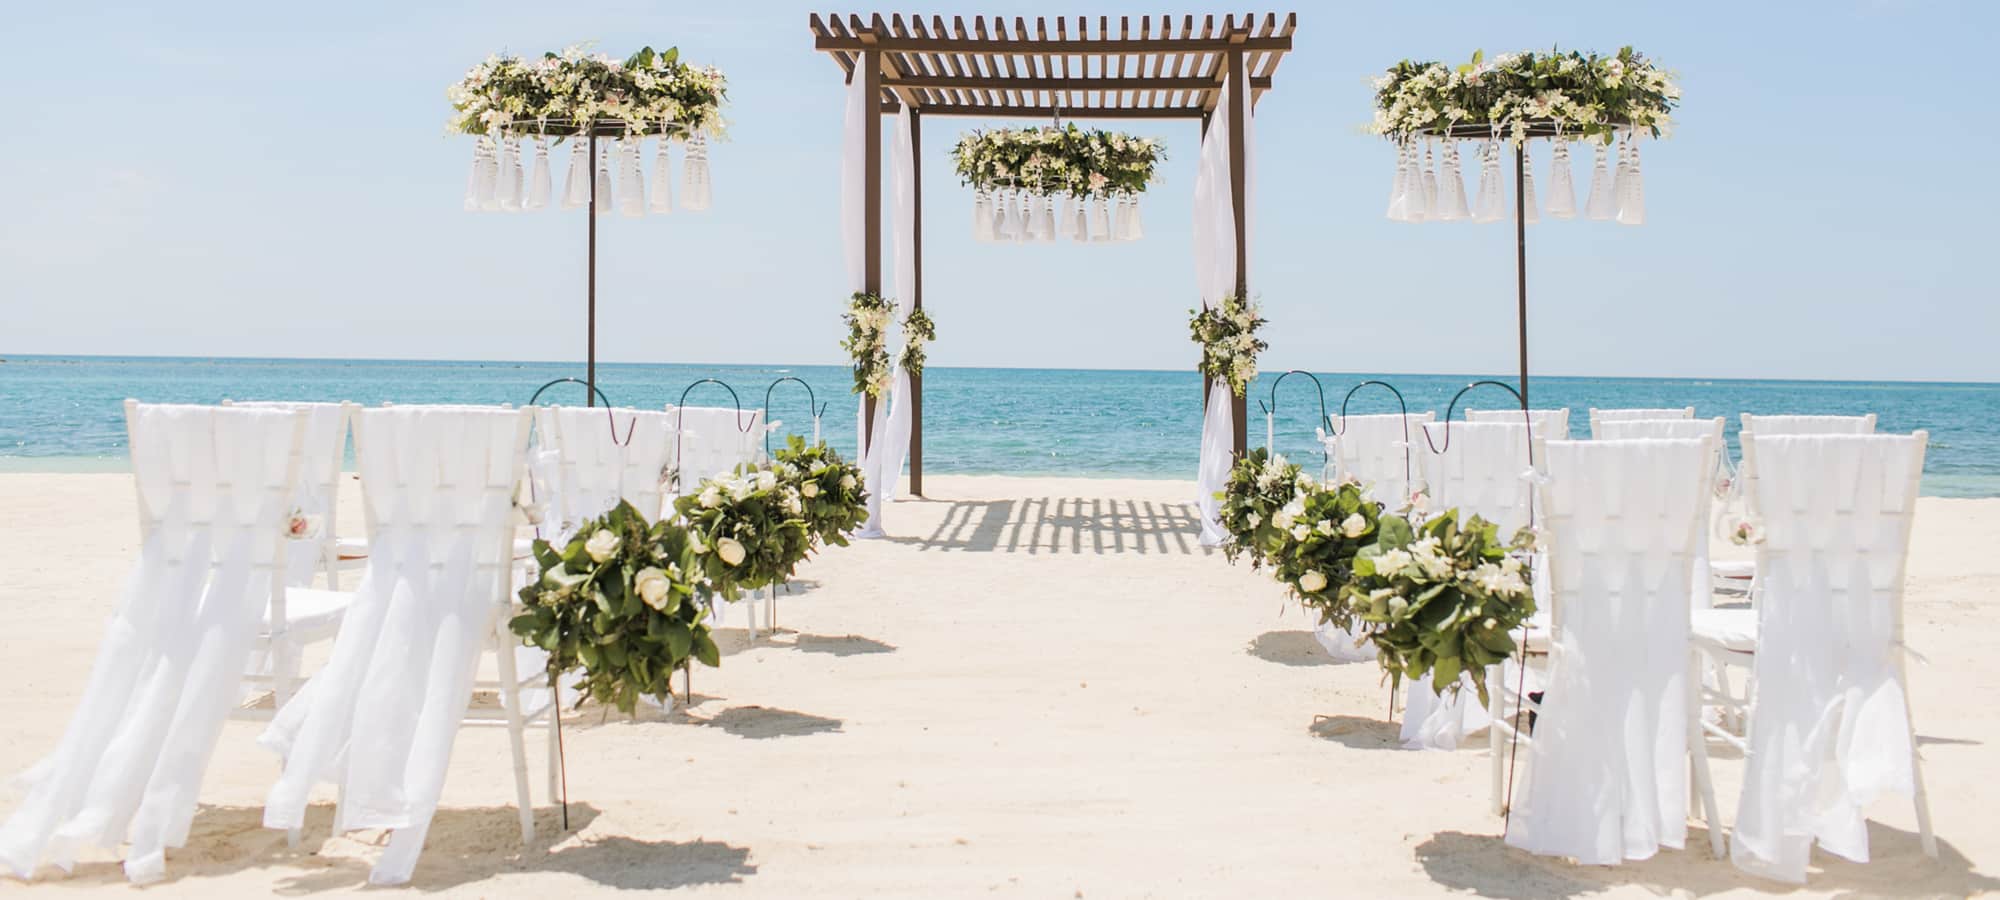 This all-inclusive resort in Jamaica offers “Insta-worthy” destination weddings.